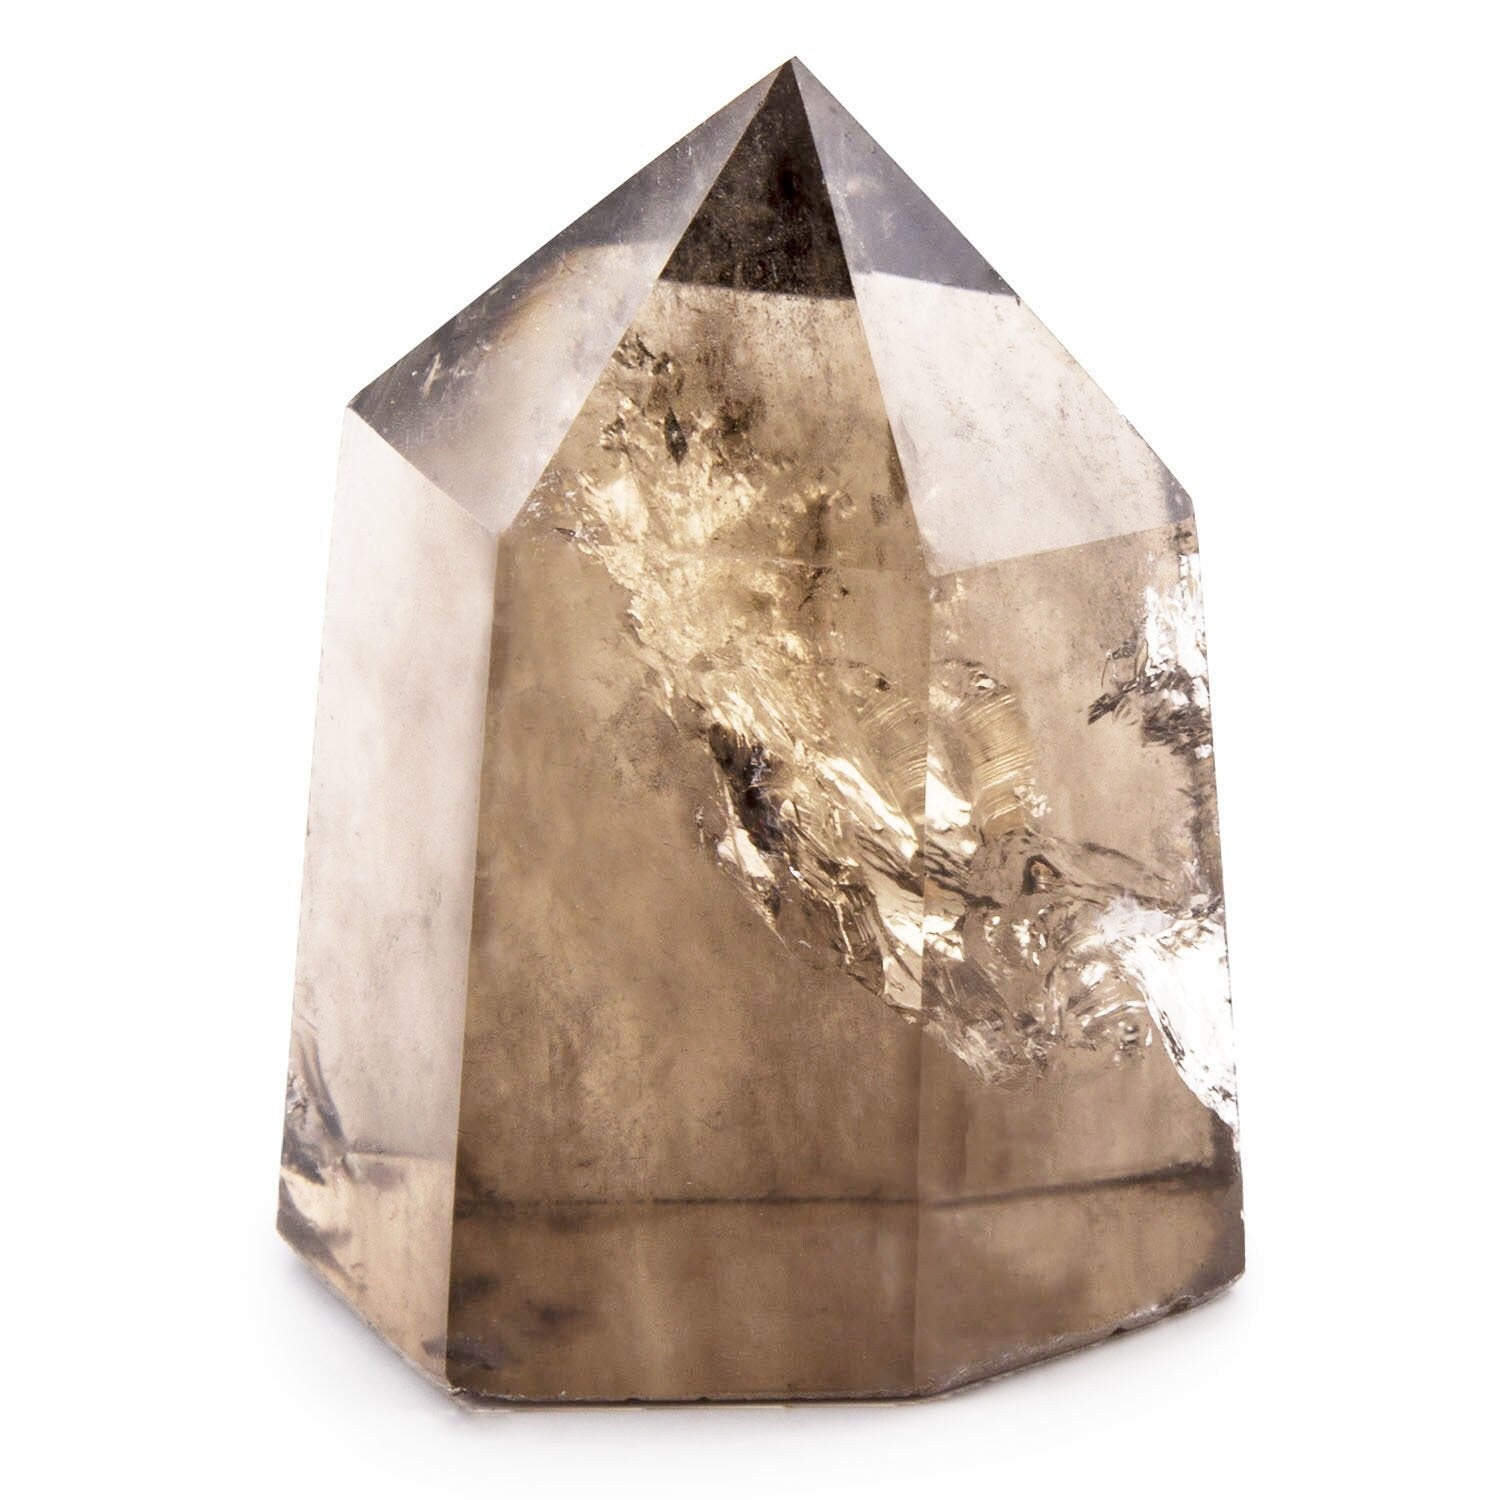 Smoky Quartz, promoting calmness and serenity for a restful sleep